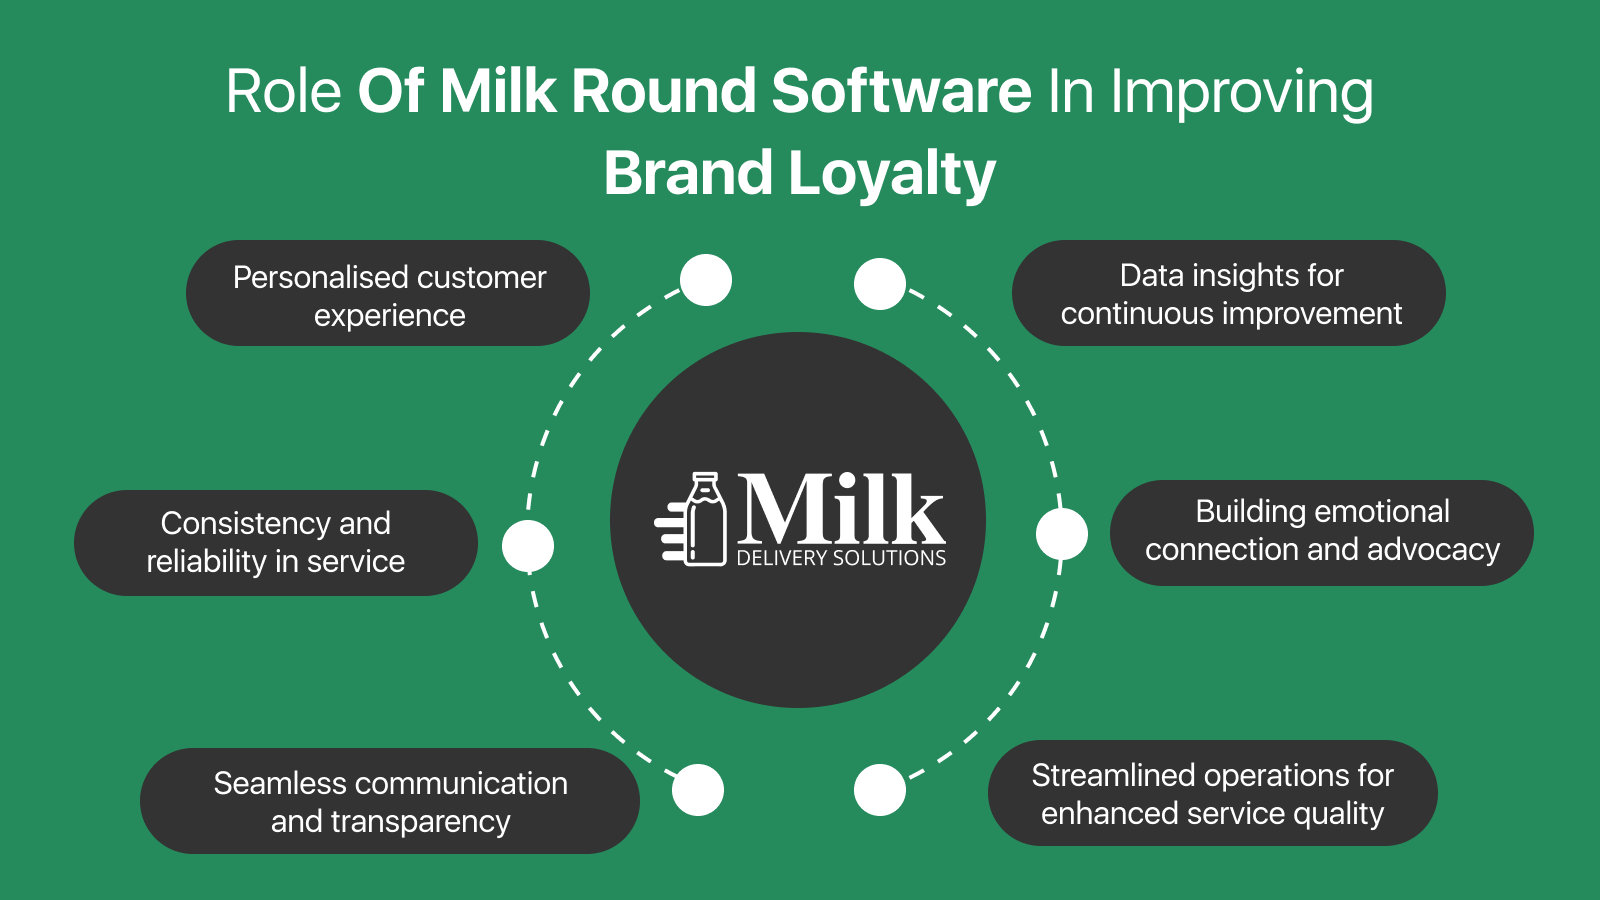 ravi garg, mds, milk round software, customer experience, consistency, reliability, communication and transparency, streamlined operations, data insights, emotional connection and advocacy